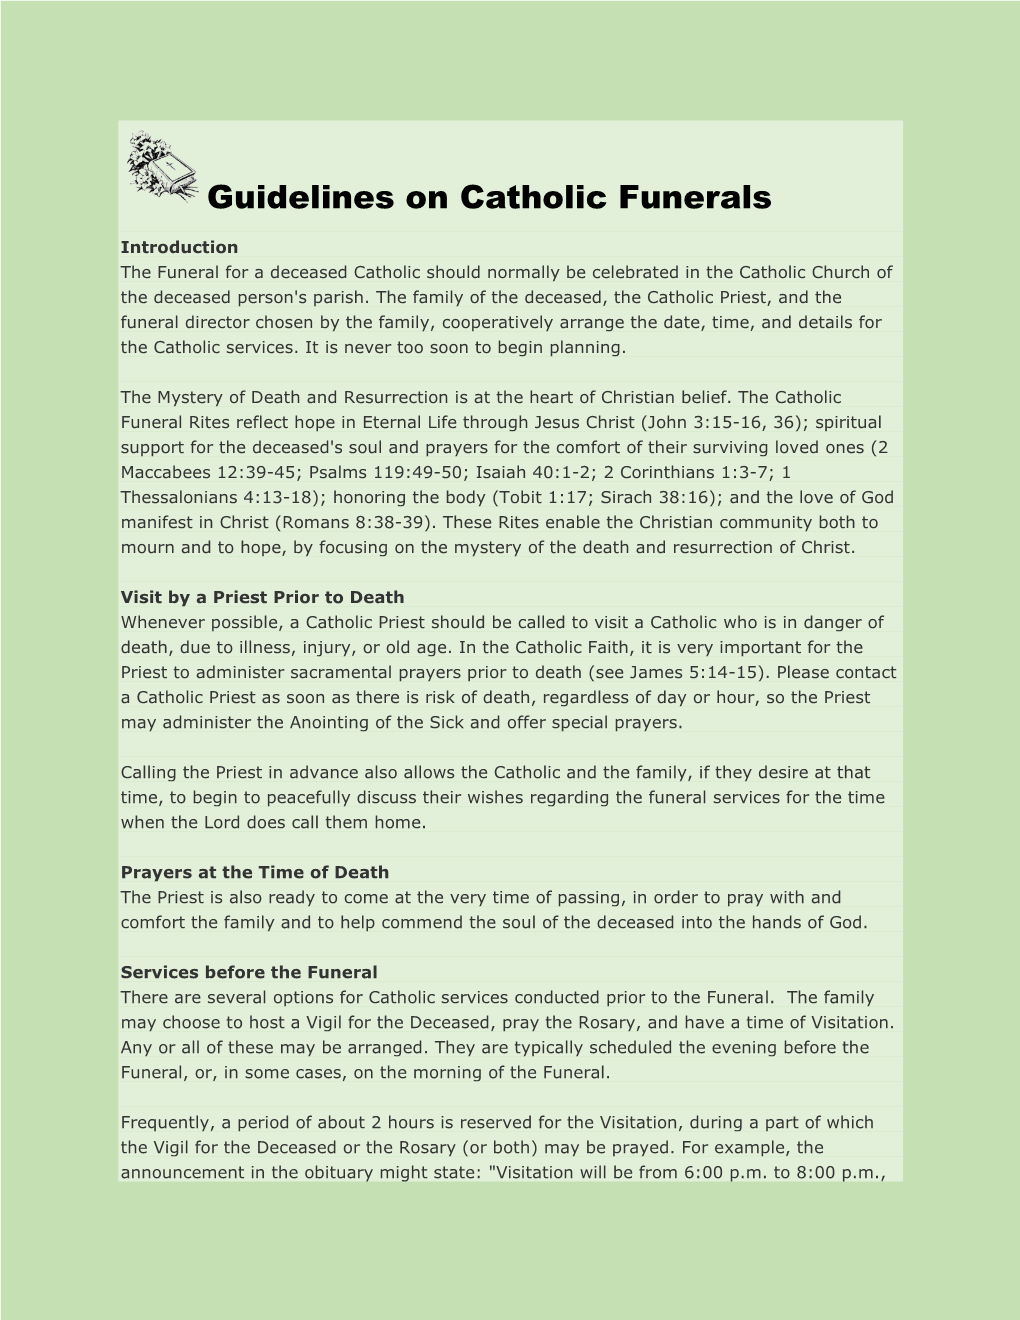 Guidelines on Catholic Funerals